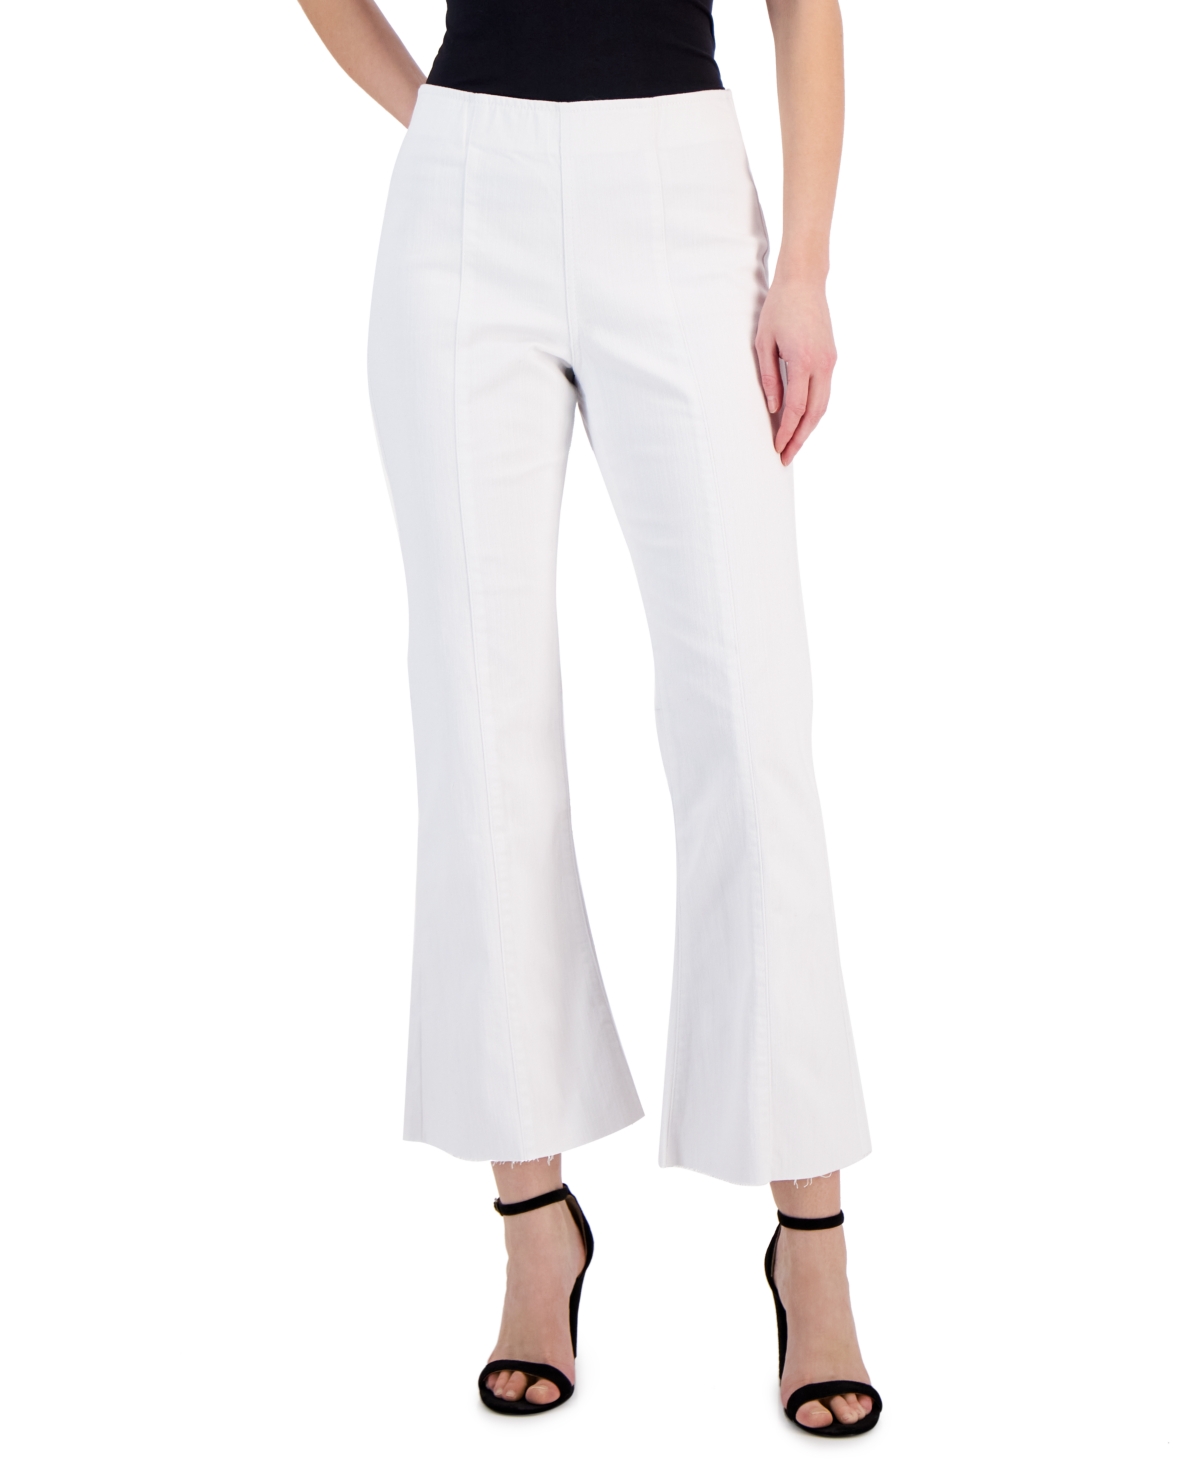  Inc International Concepts Women's Pull-On Flared Cropped Jeans, Created for Macy's